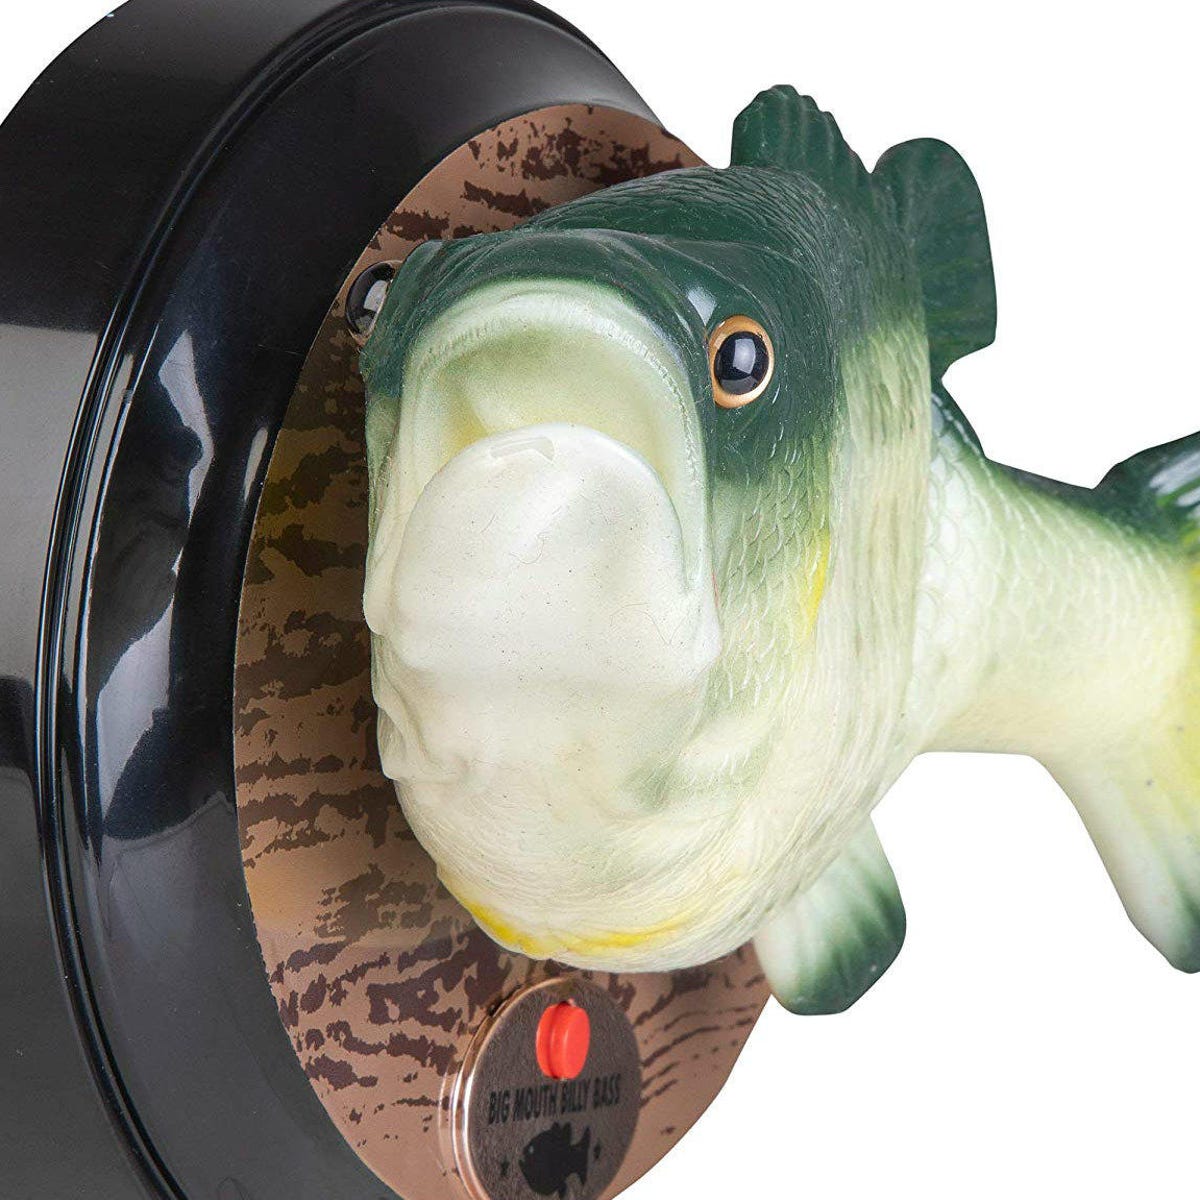 s Alexa reels in Big Mouth Billy Bass at last - CNET